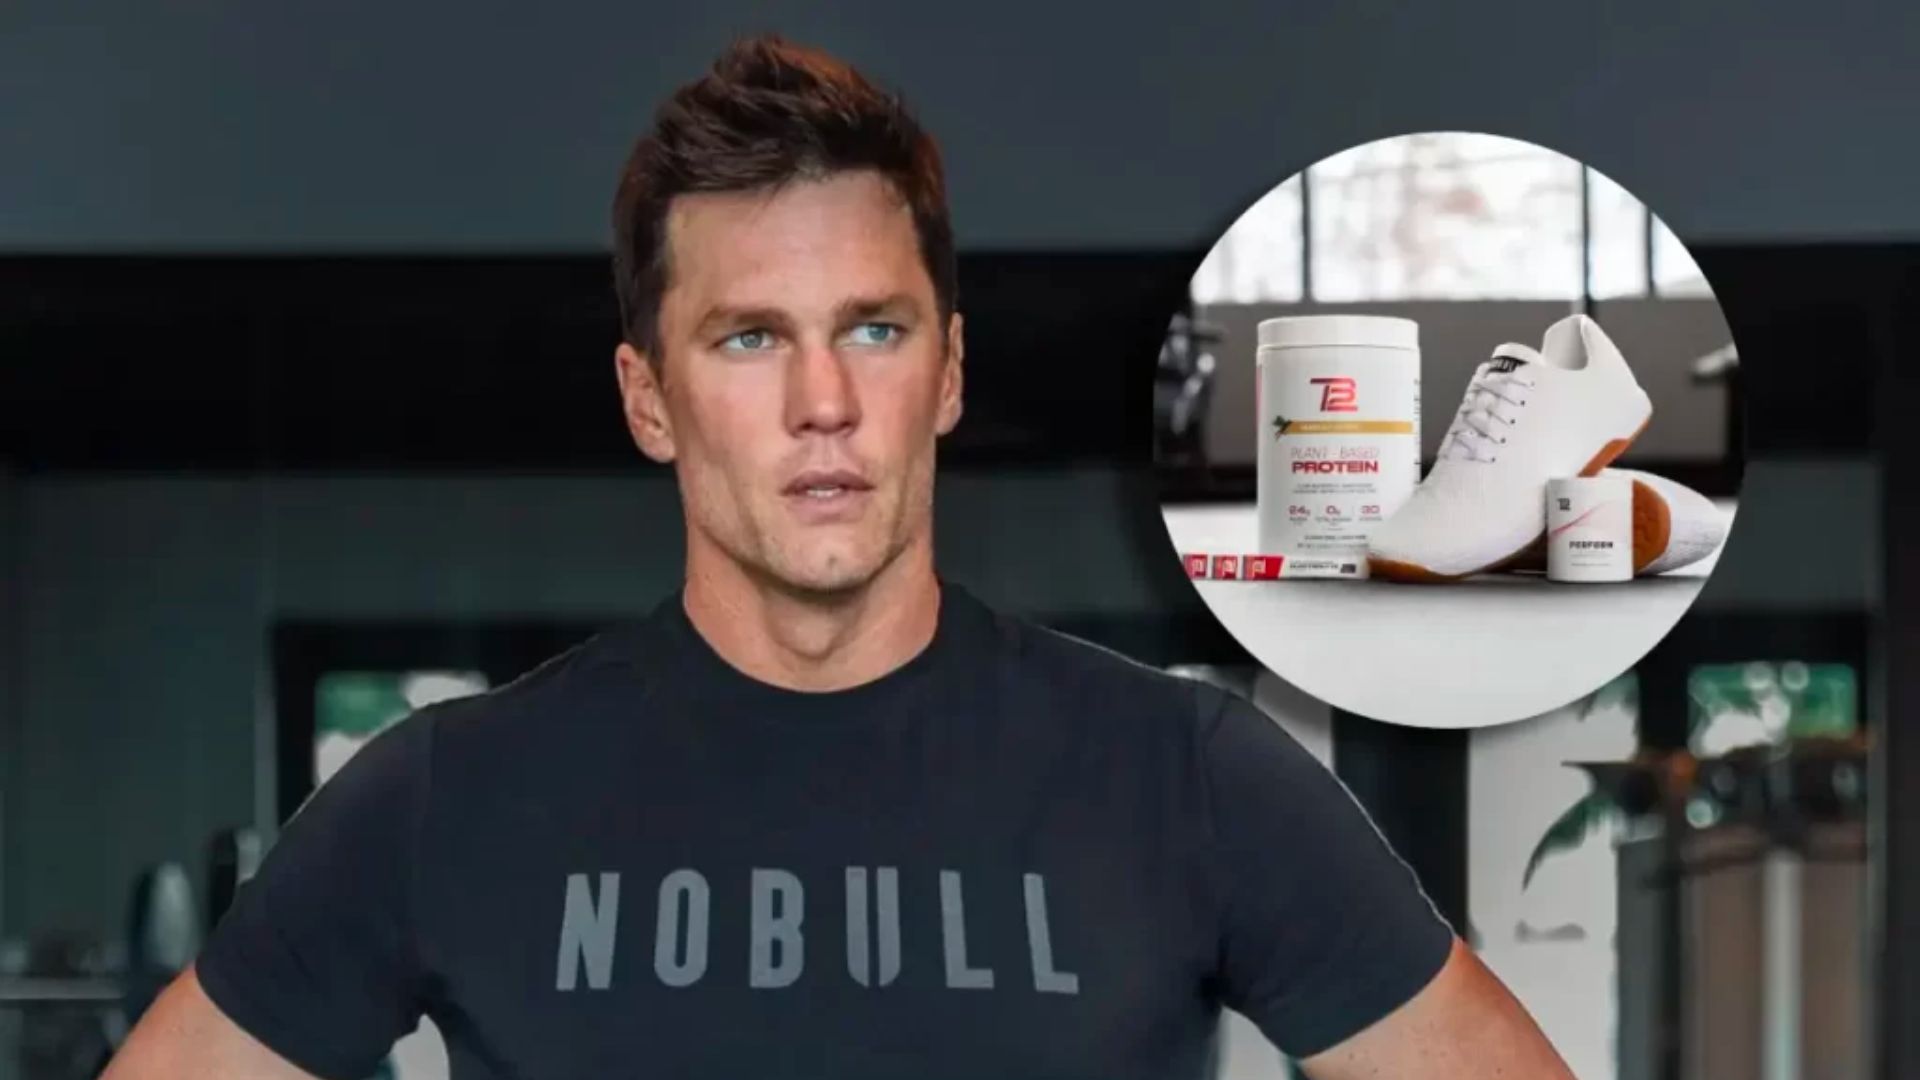 Tom Brady Combines His Nutrition and Clothing Brands with Fitness Firm Nobull